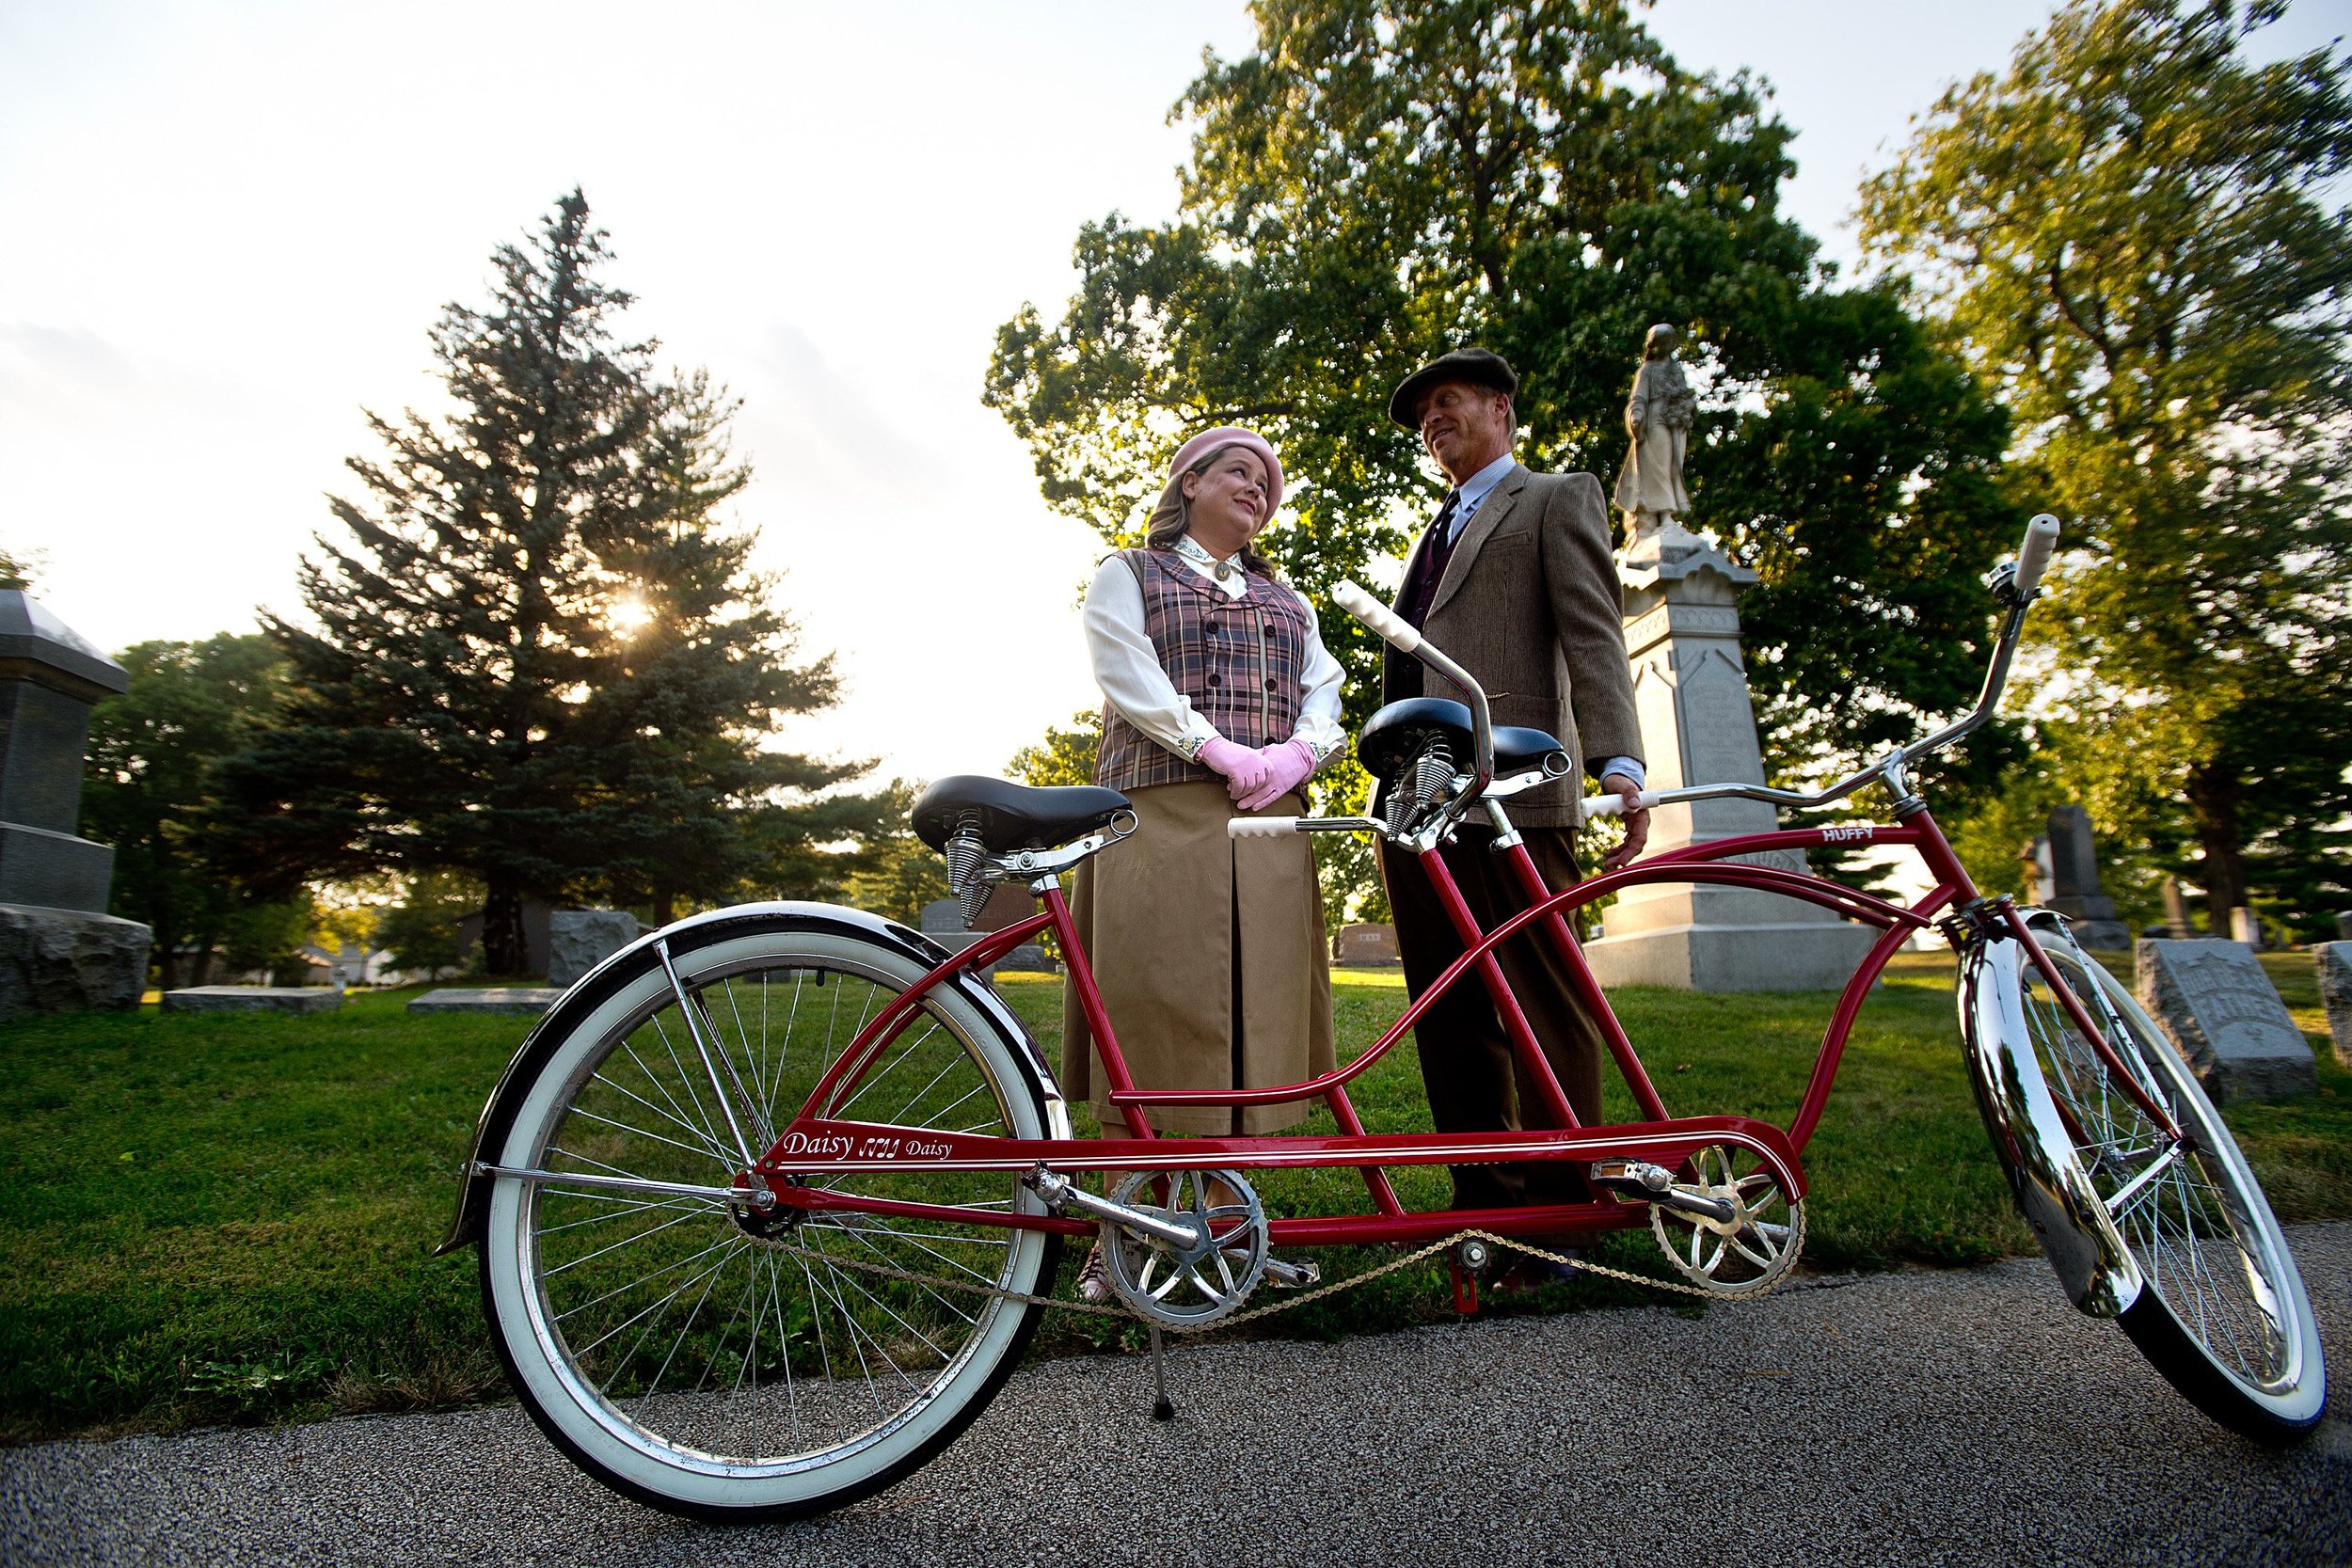  Cristen Monson and her husband, David Krostal, rehearse as Emily Vecchi Noble and Clyde Noble for the 2018 Evergreen Cemetery Walk in Bloomington, Illinois. The walk is held in Evergreen Memorial Cemetery where costumed actors portray individuals, r